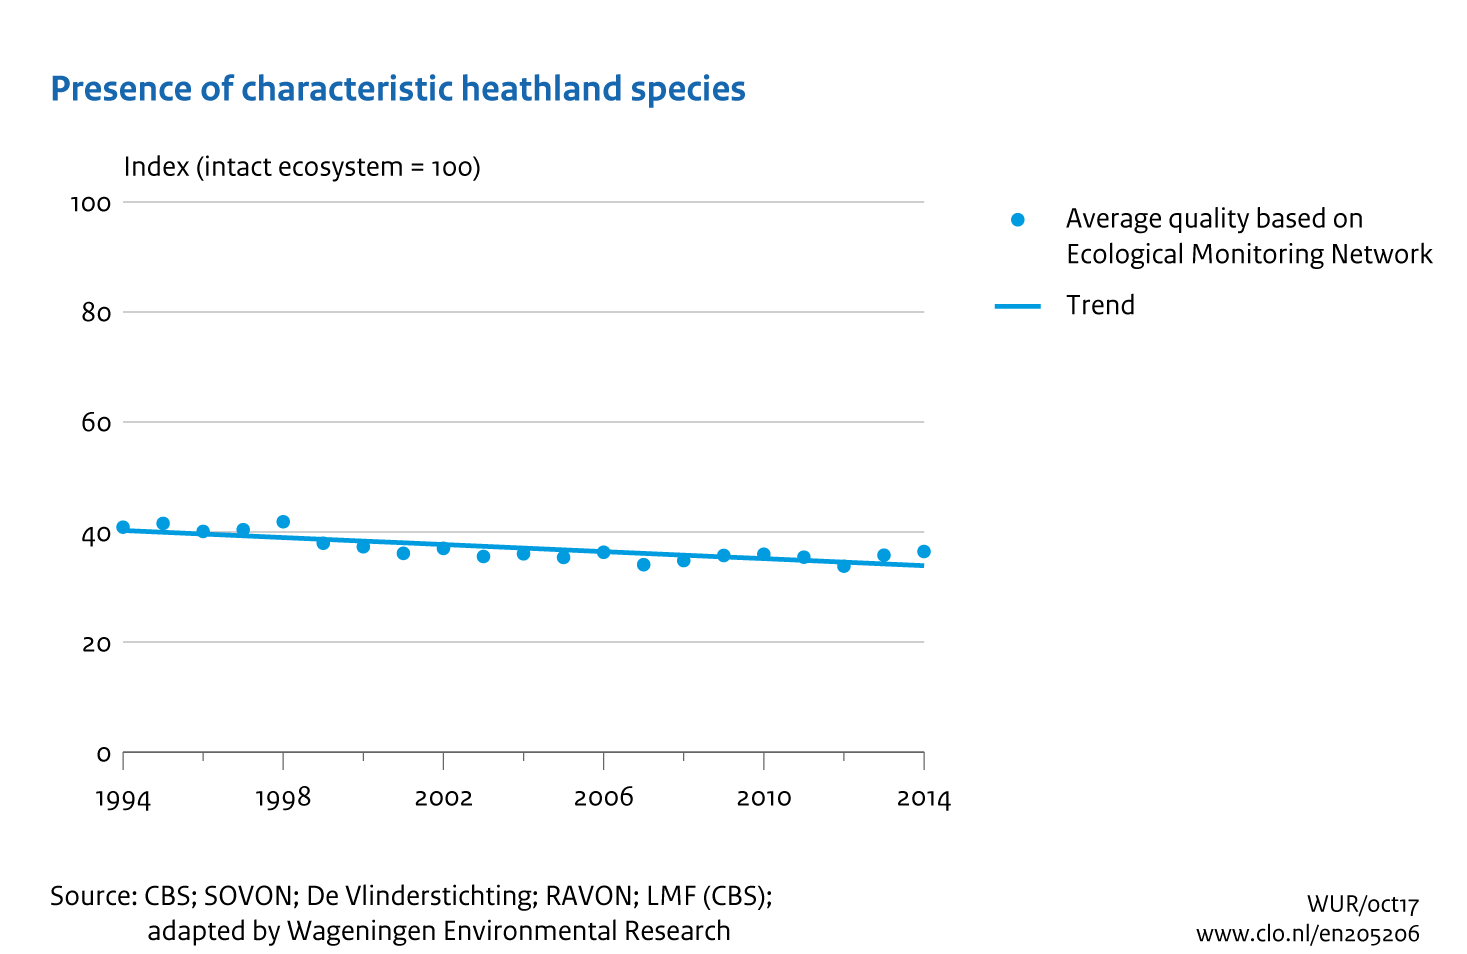 Image Presence of characteristic heathland species. The image is further explained in the text.